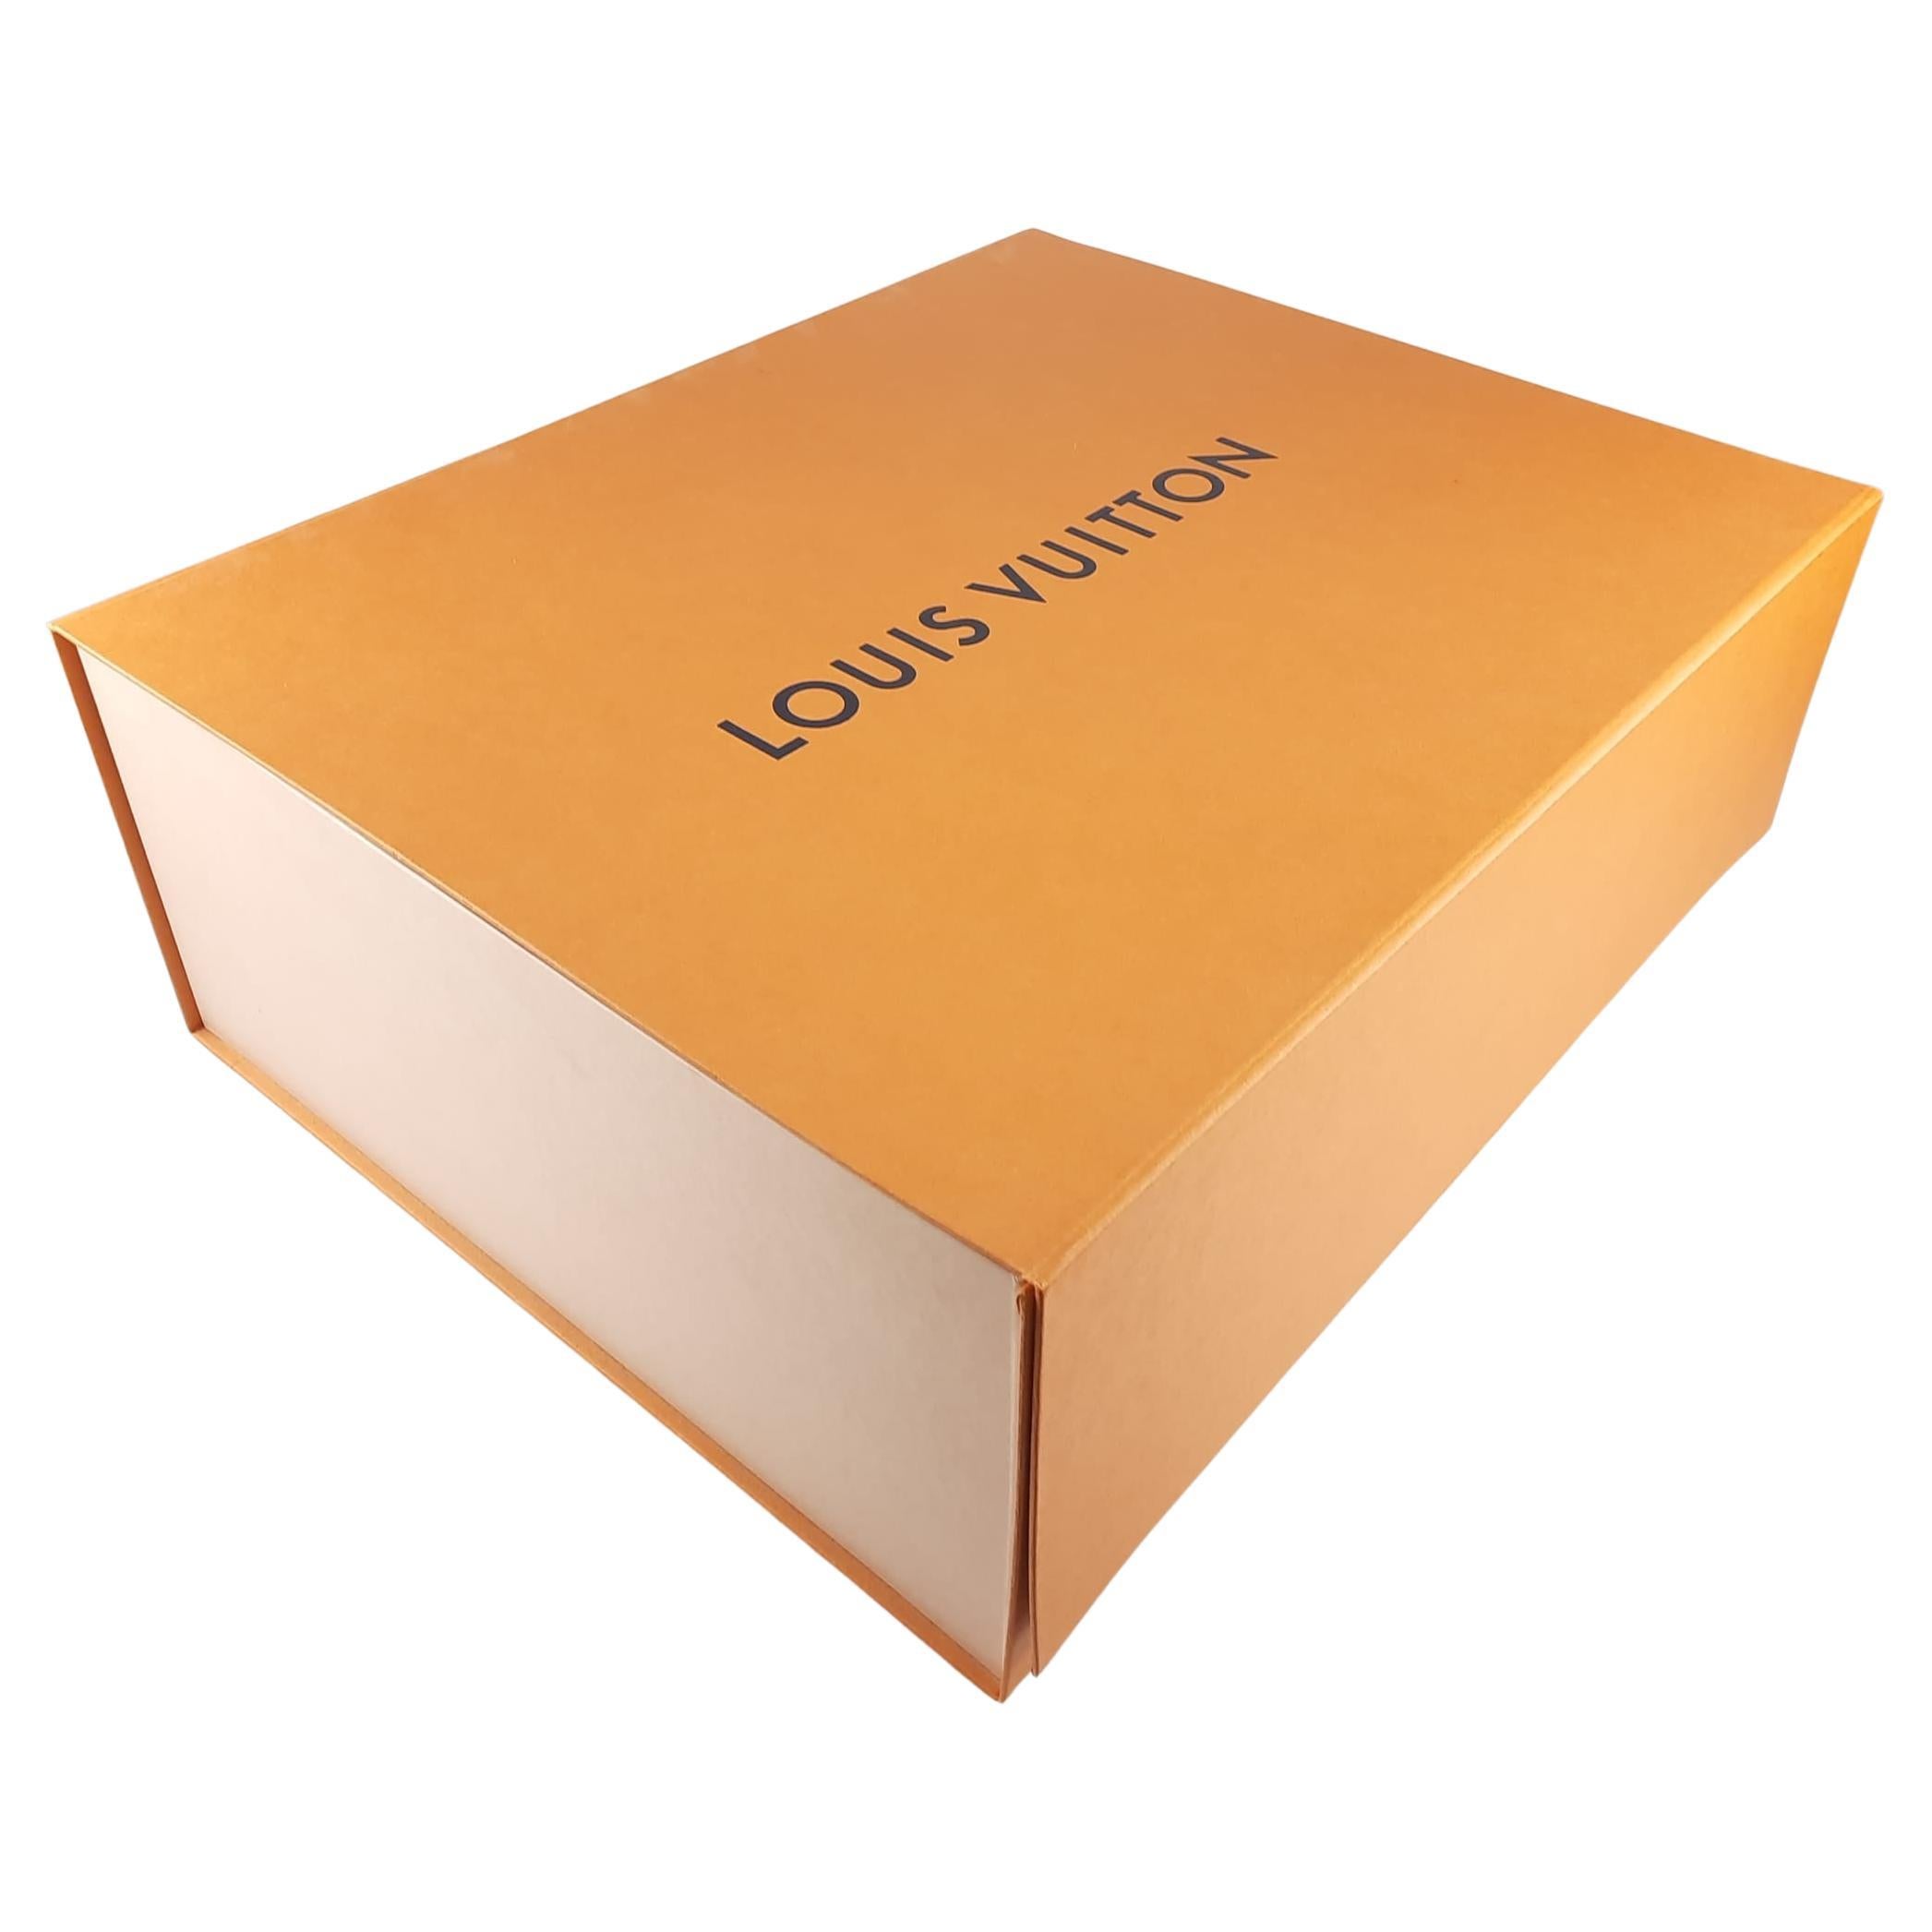 Louis Vuitton Box - 1,038 For Sale on 1stDibs  how much is a louis vuitton  box worth, louis vuitton bag box for sale, fake lv box